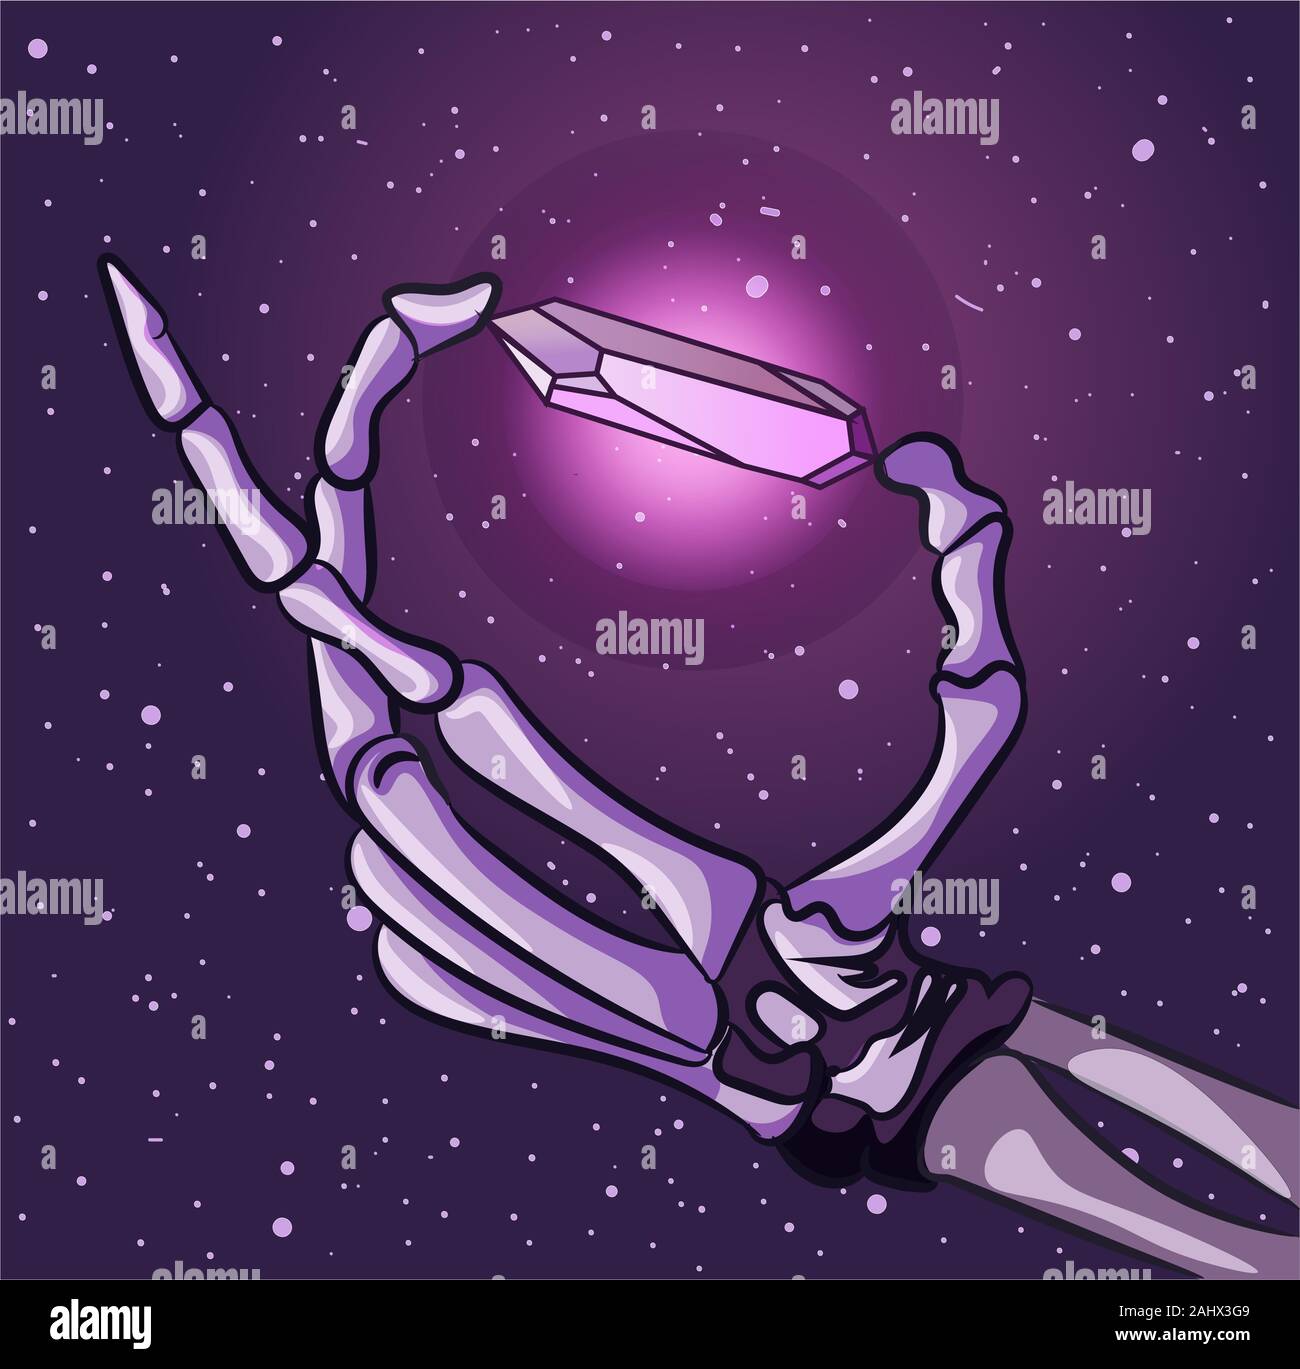 Skeleton zombie holding a glowing radioactive amethyst stone in his hands. Drawing of a dead human hand under the starry night sky. Stock Vector